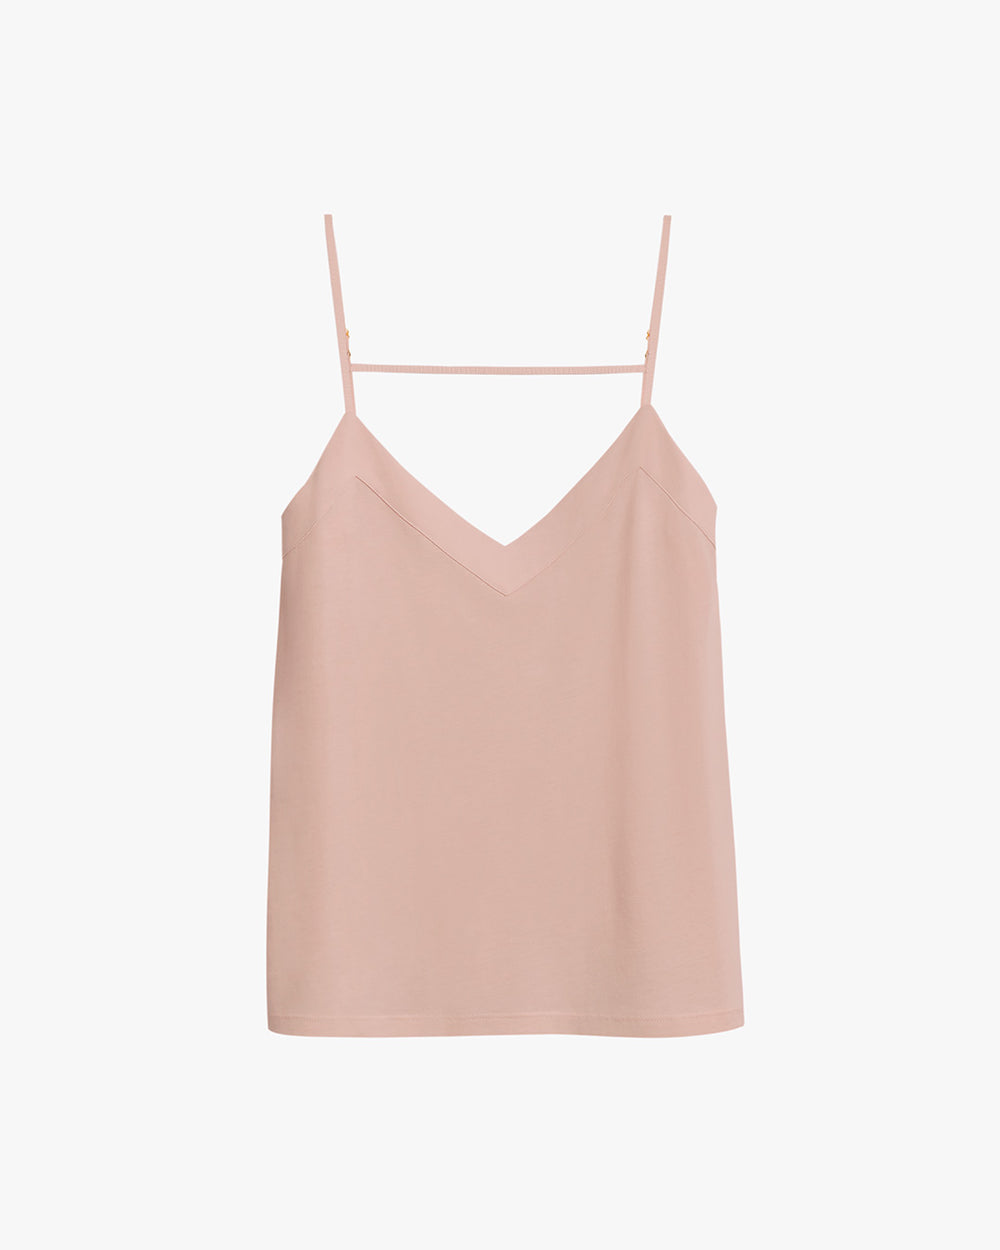 Camisole top with thin straps and a V-neckline hanging on a hanger.